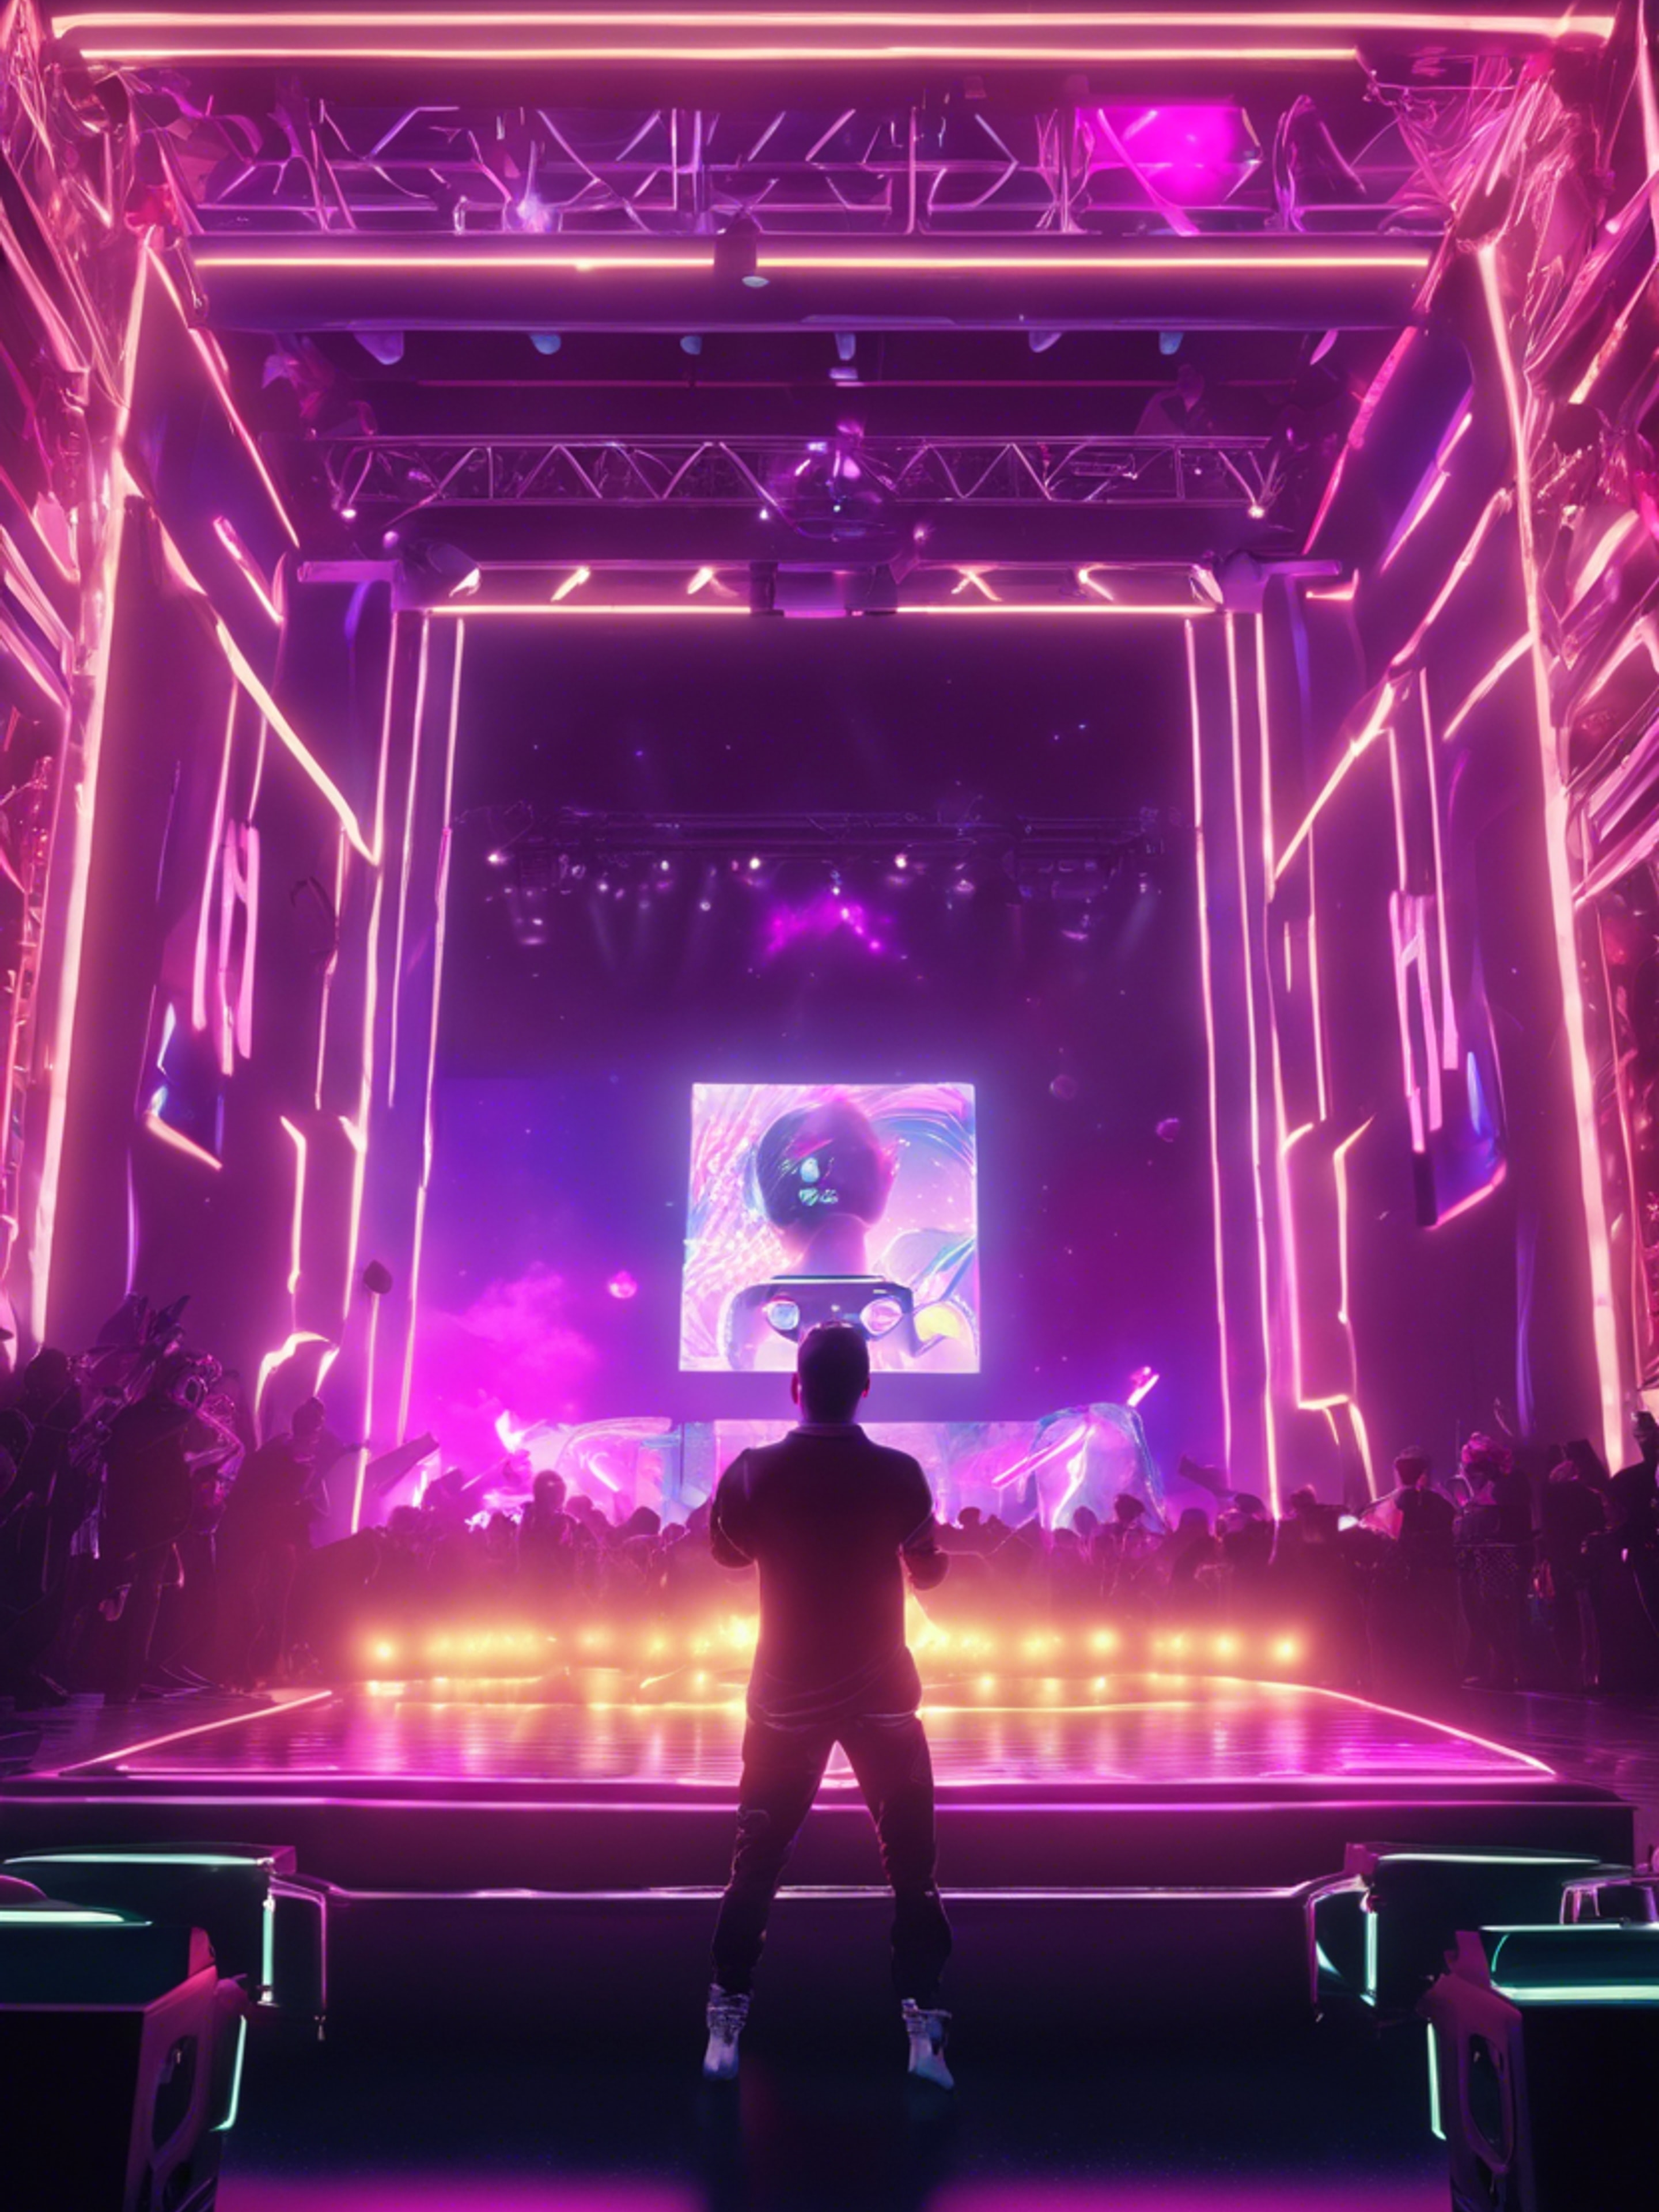 A virtual concert in a Y2K gaming environment, with neon spotlights showcasing a digital avatar performing onstage. Taustakuva[570c0802add746f5a0b1]